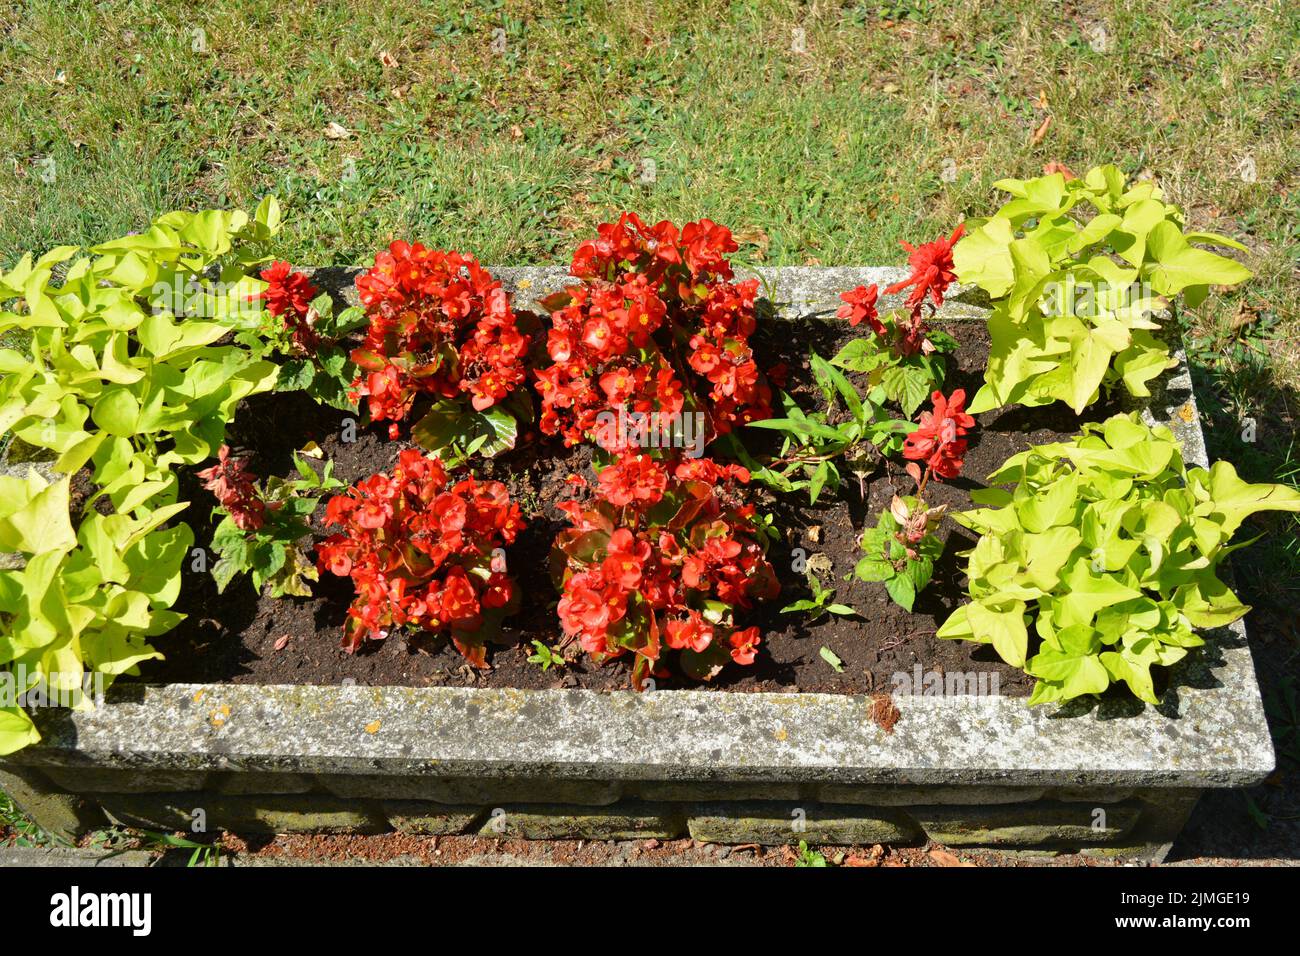 Bright colorful red flowers growing in a vase in one of the streets of Wyszkw, Poland. Stock Photo